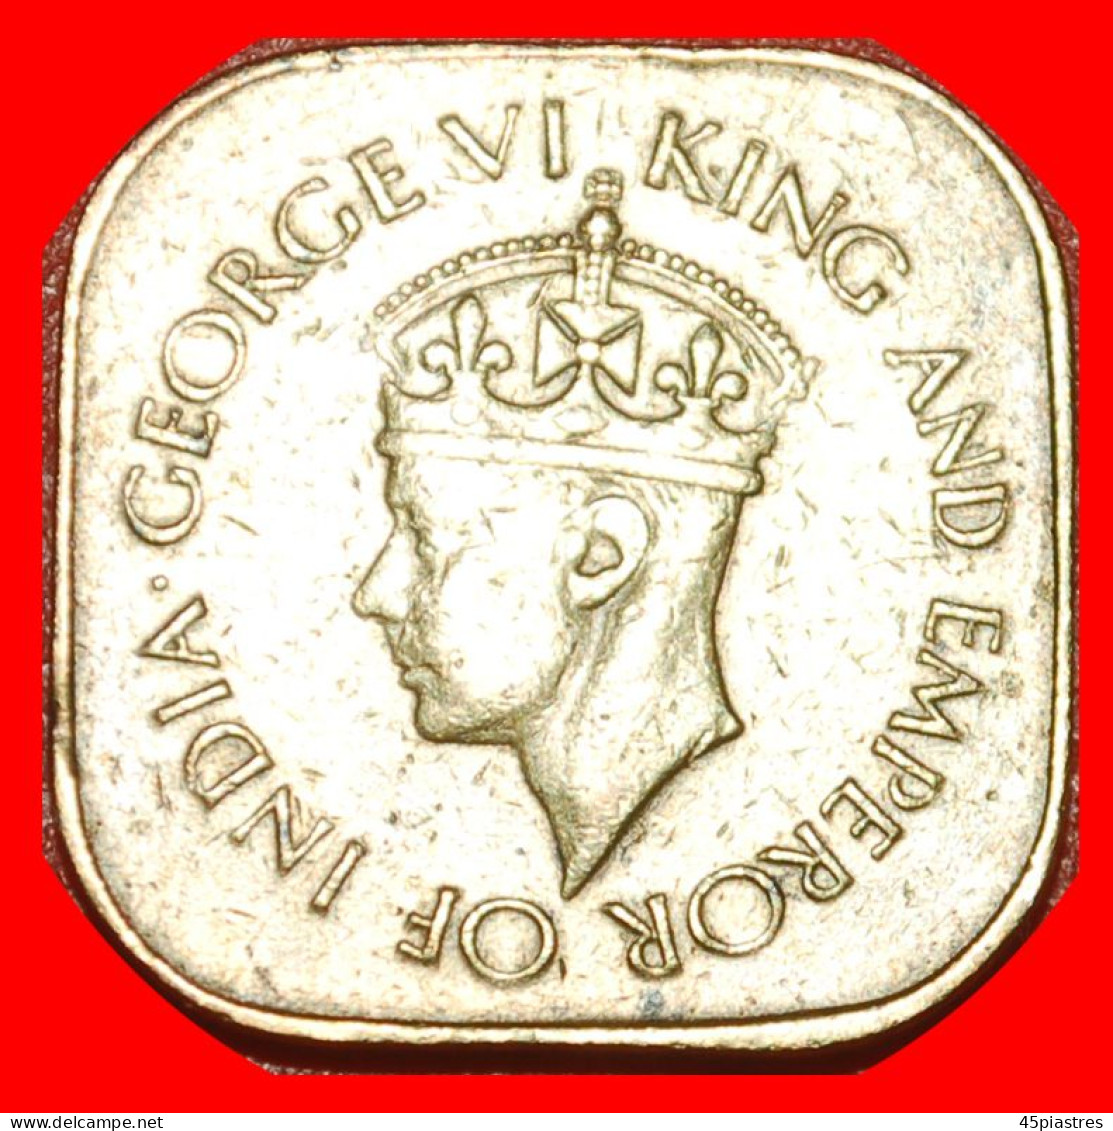 * GREAT BRITAIN WARTIME (1939-1945): CEYLON 5 CENTS 1942 JUST PUBLISHED! GEORGE VI 1937-1952· LOW START ·  NO RESERVE! - Sri Lanka